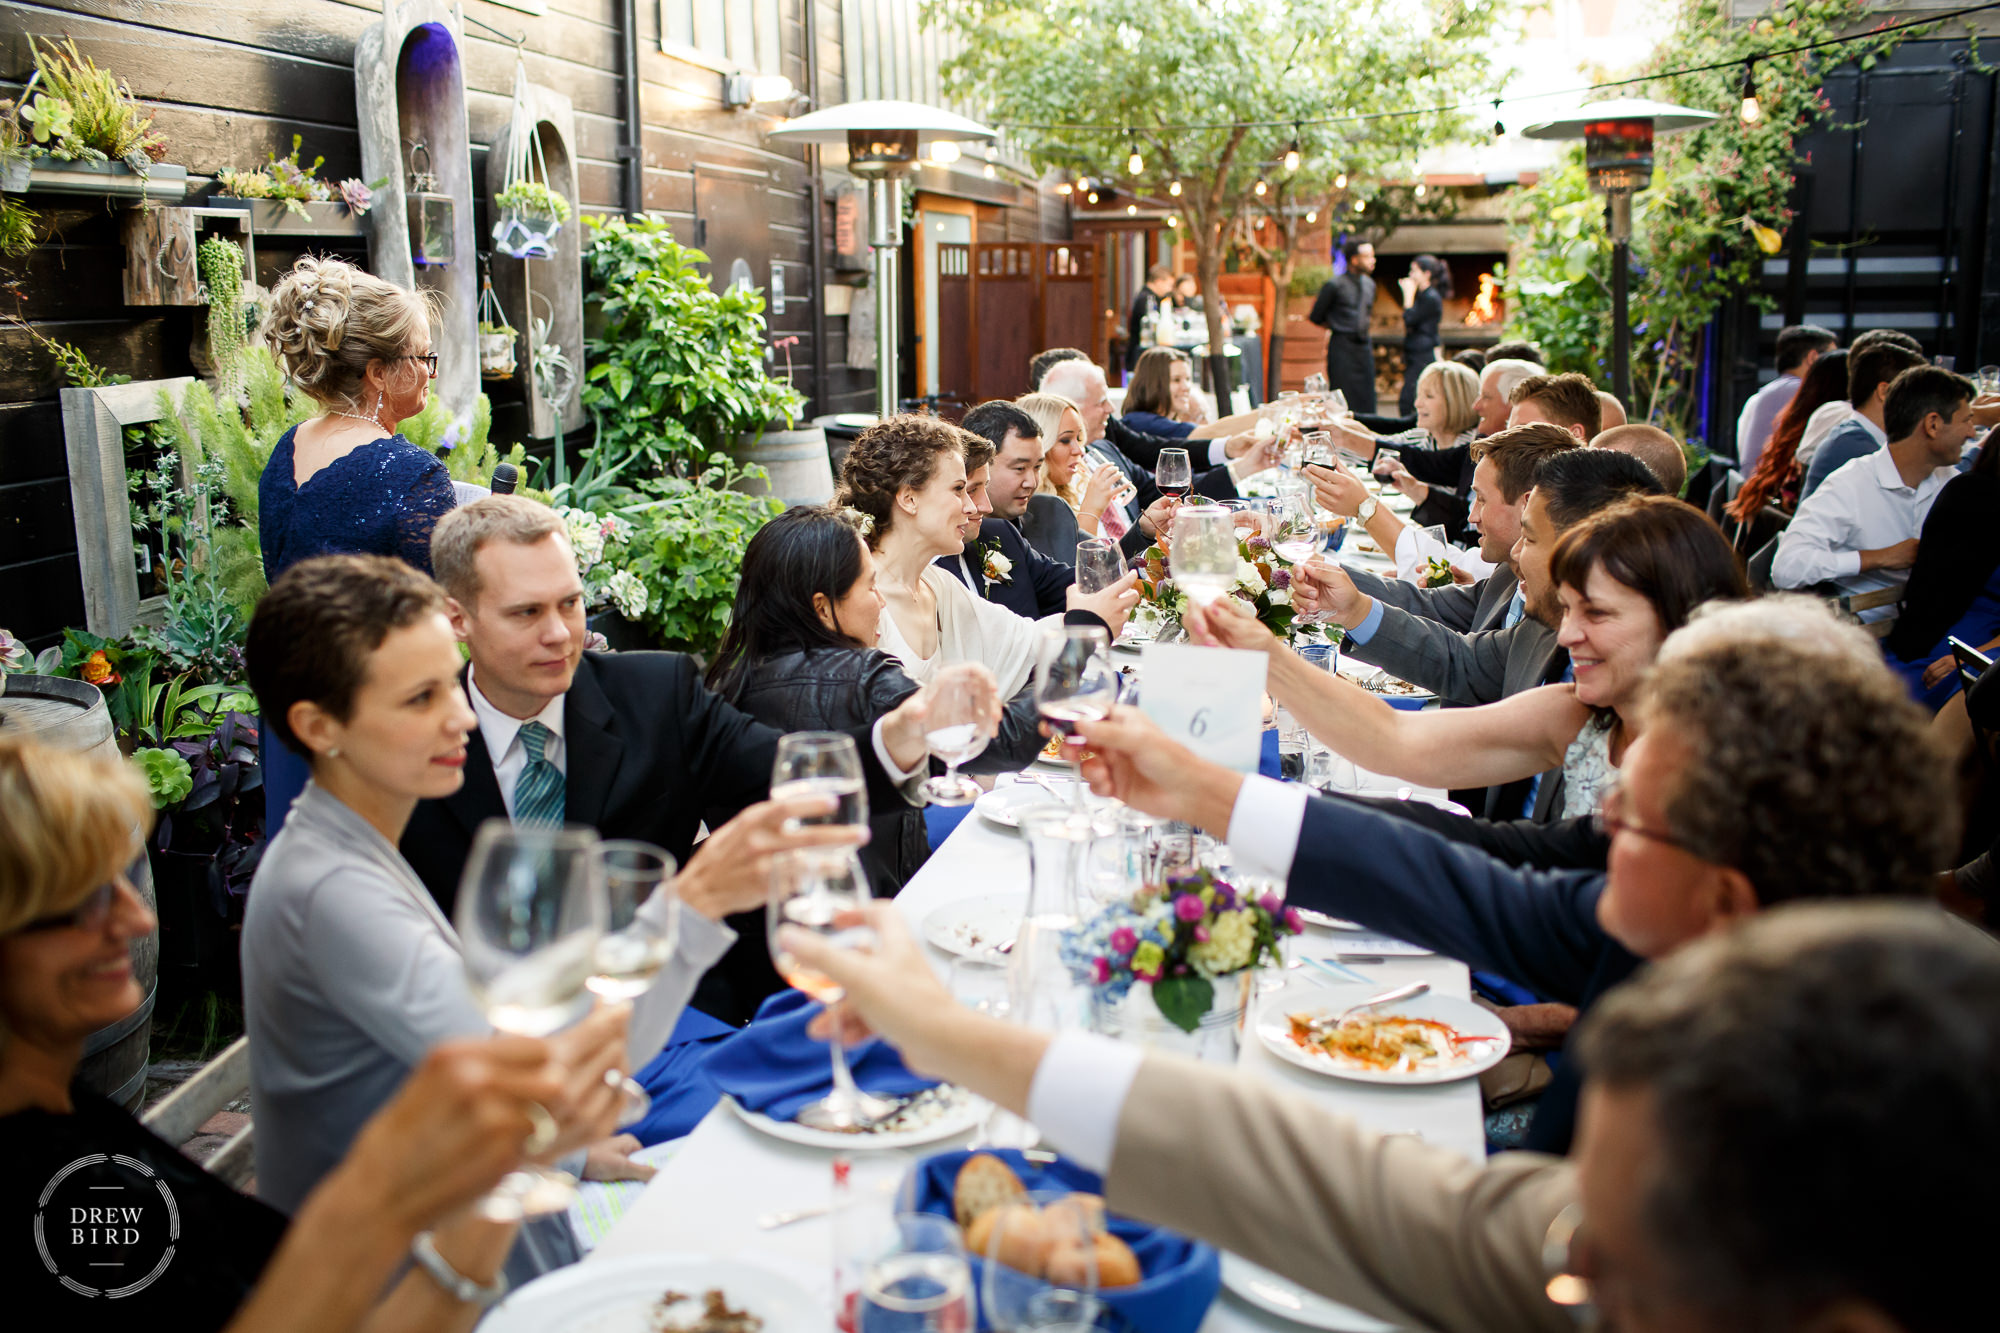 People raising glasses for cheers wiong table in an outdoor garden reception. Stable Cafe a San Francisco wedding venue.